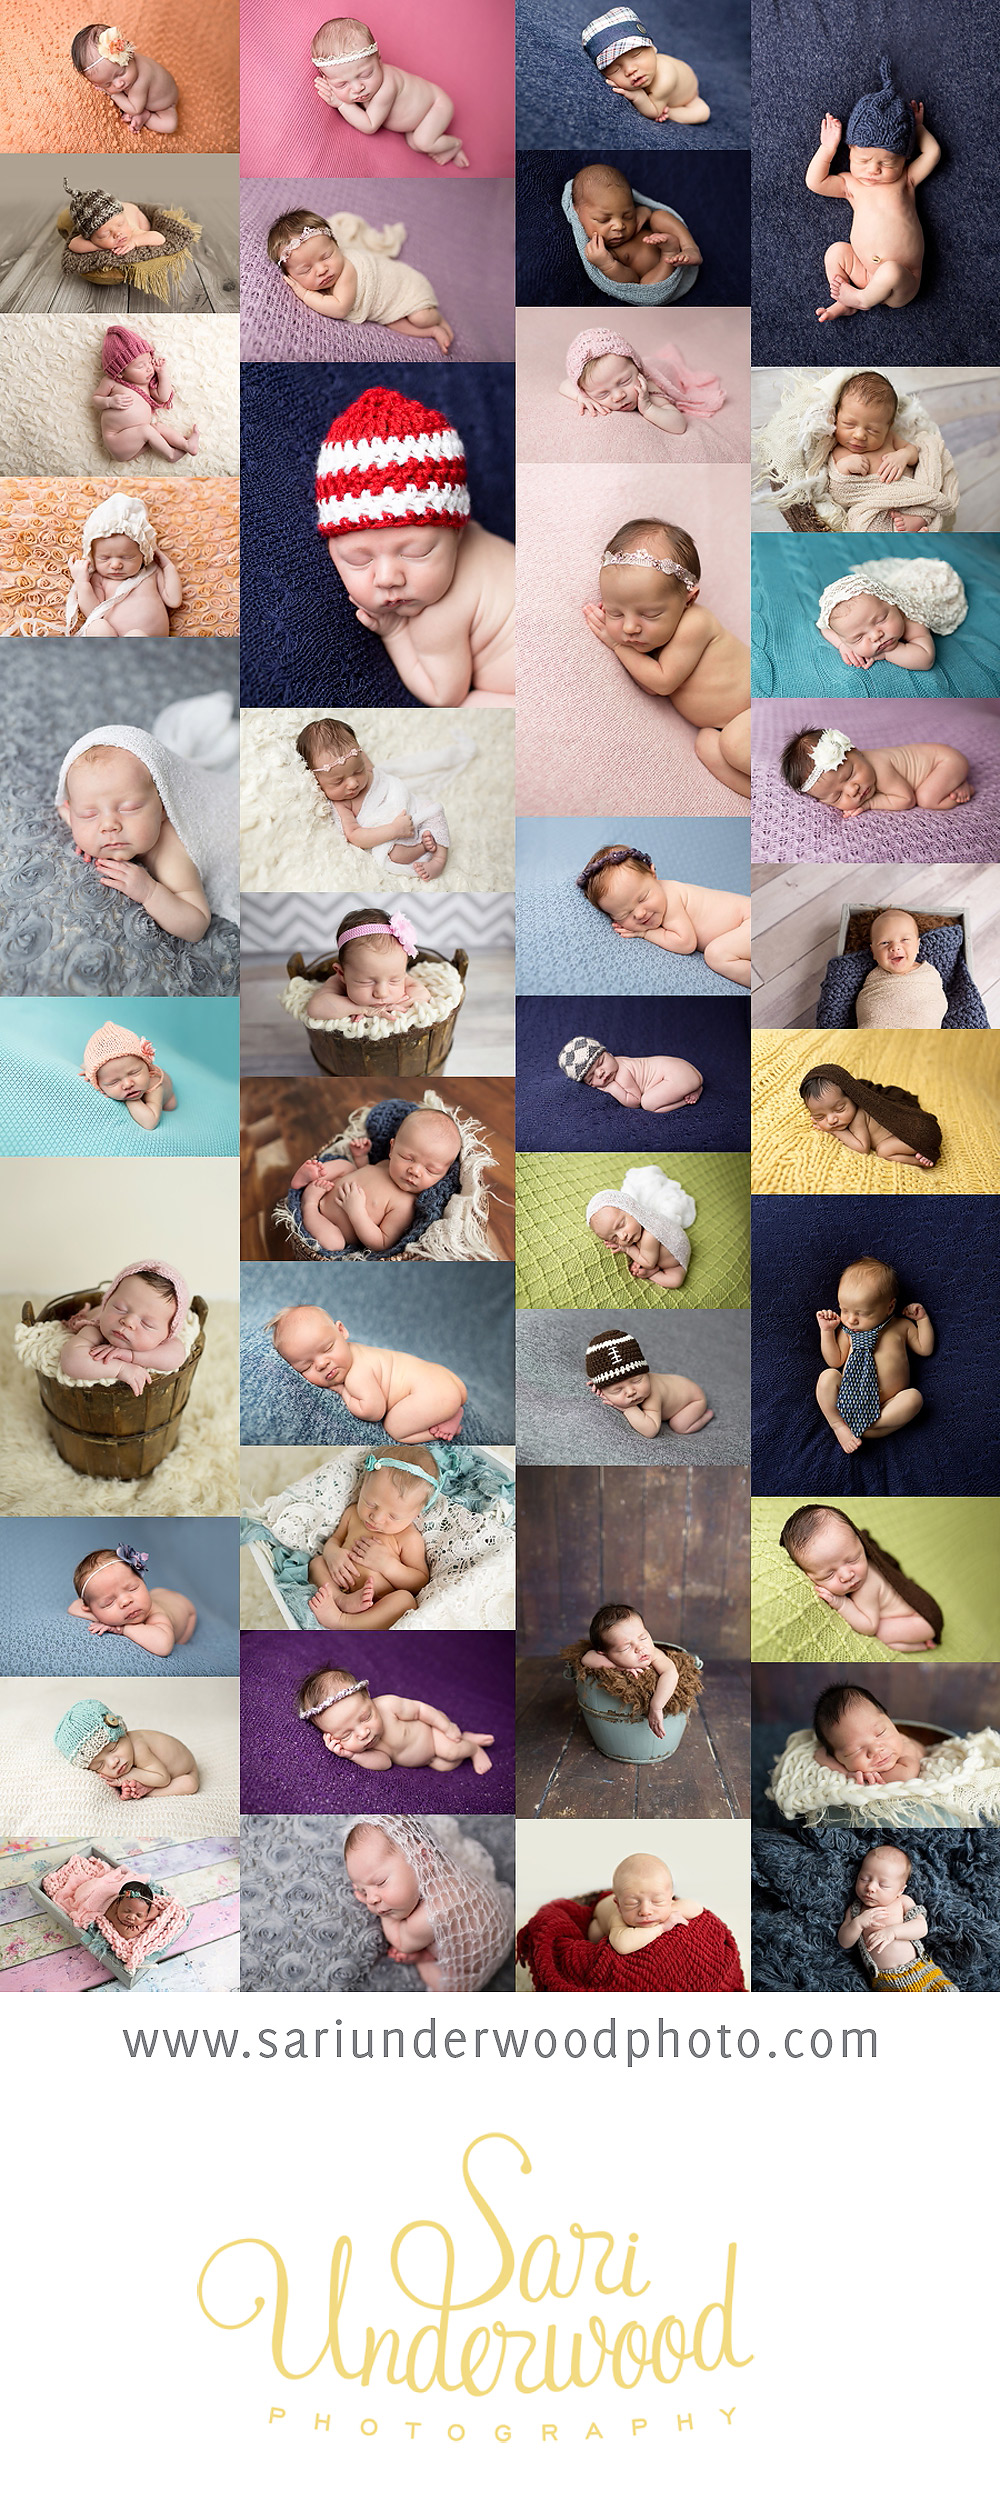 a collage of the newborns photographed by Sari Underwood in 2013